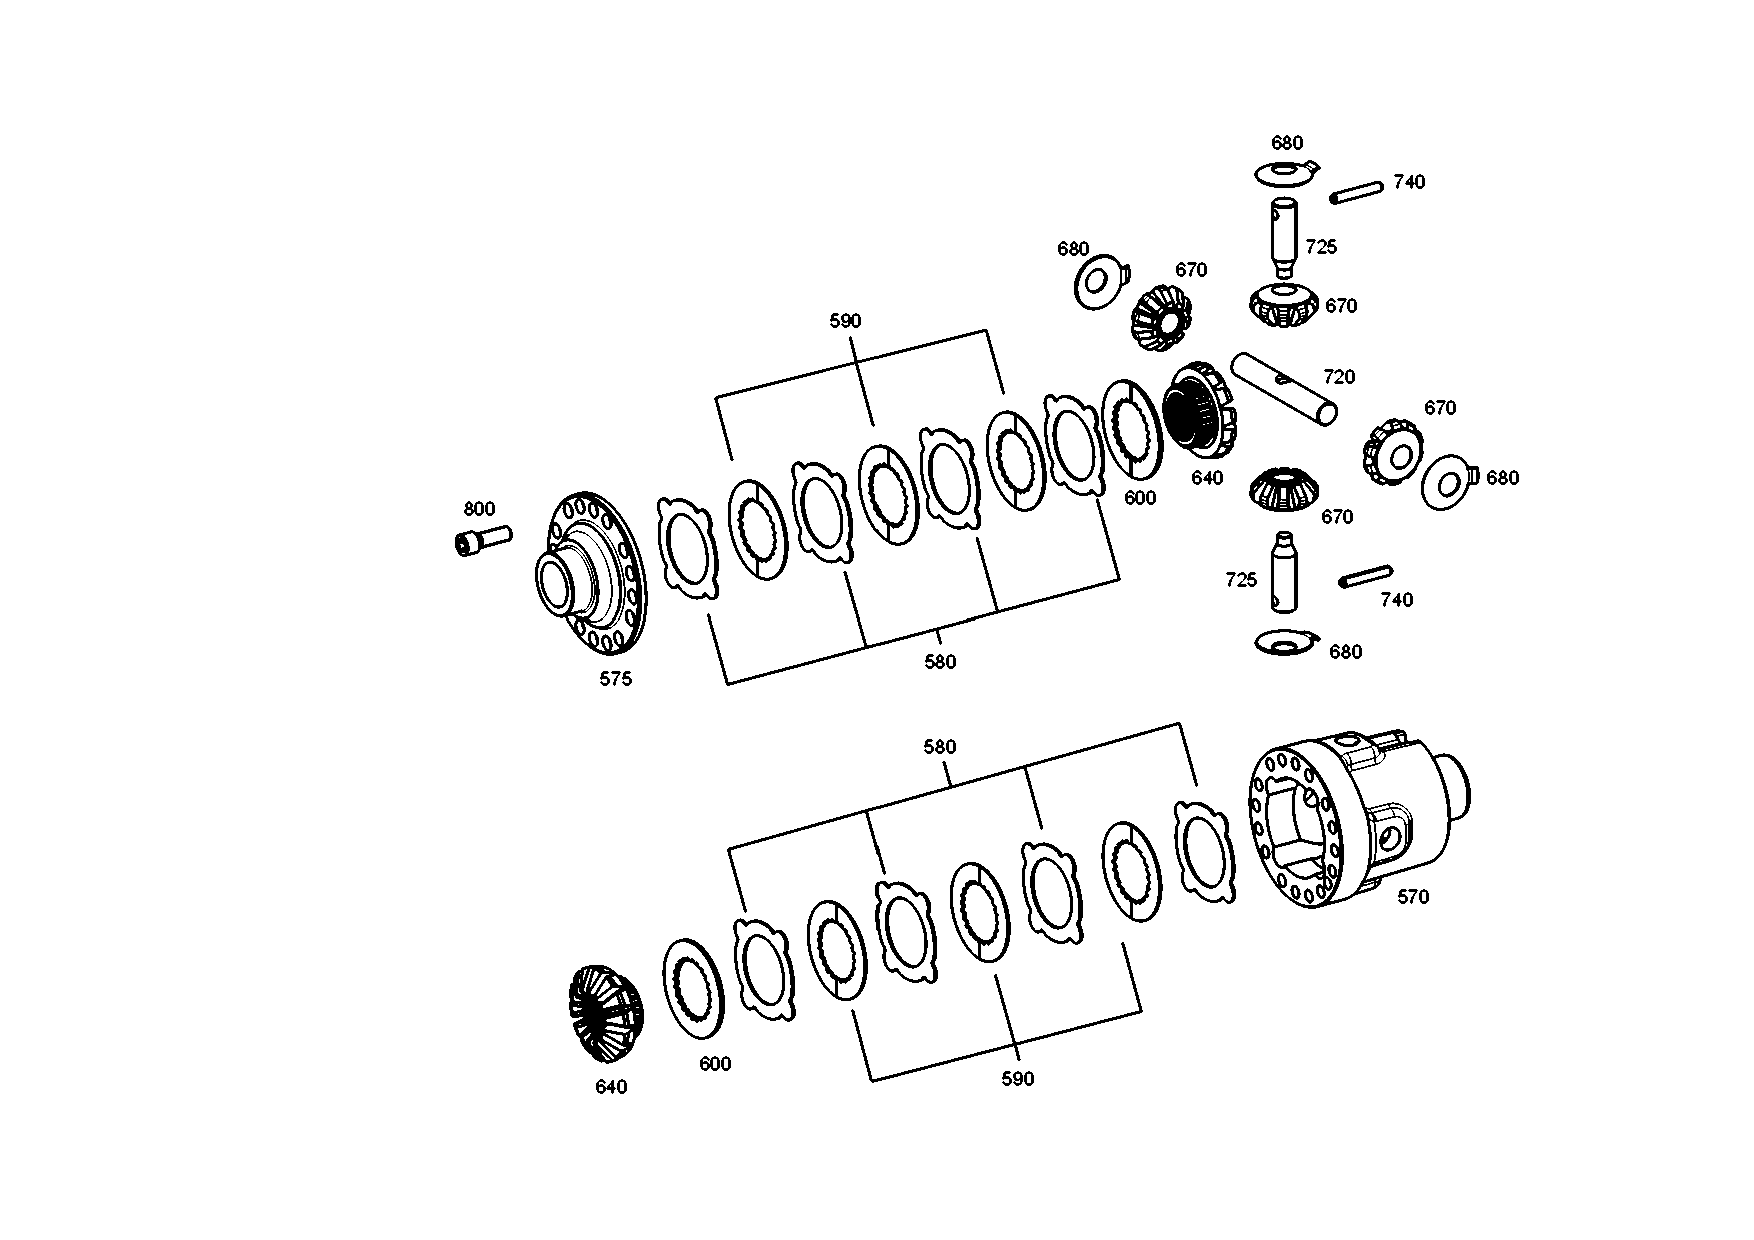 drawing for CATERPILLAR INC. 519-7019 - DIFFERENTIAL AXLE (figure 4)